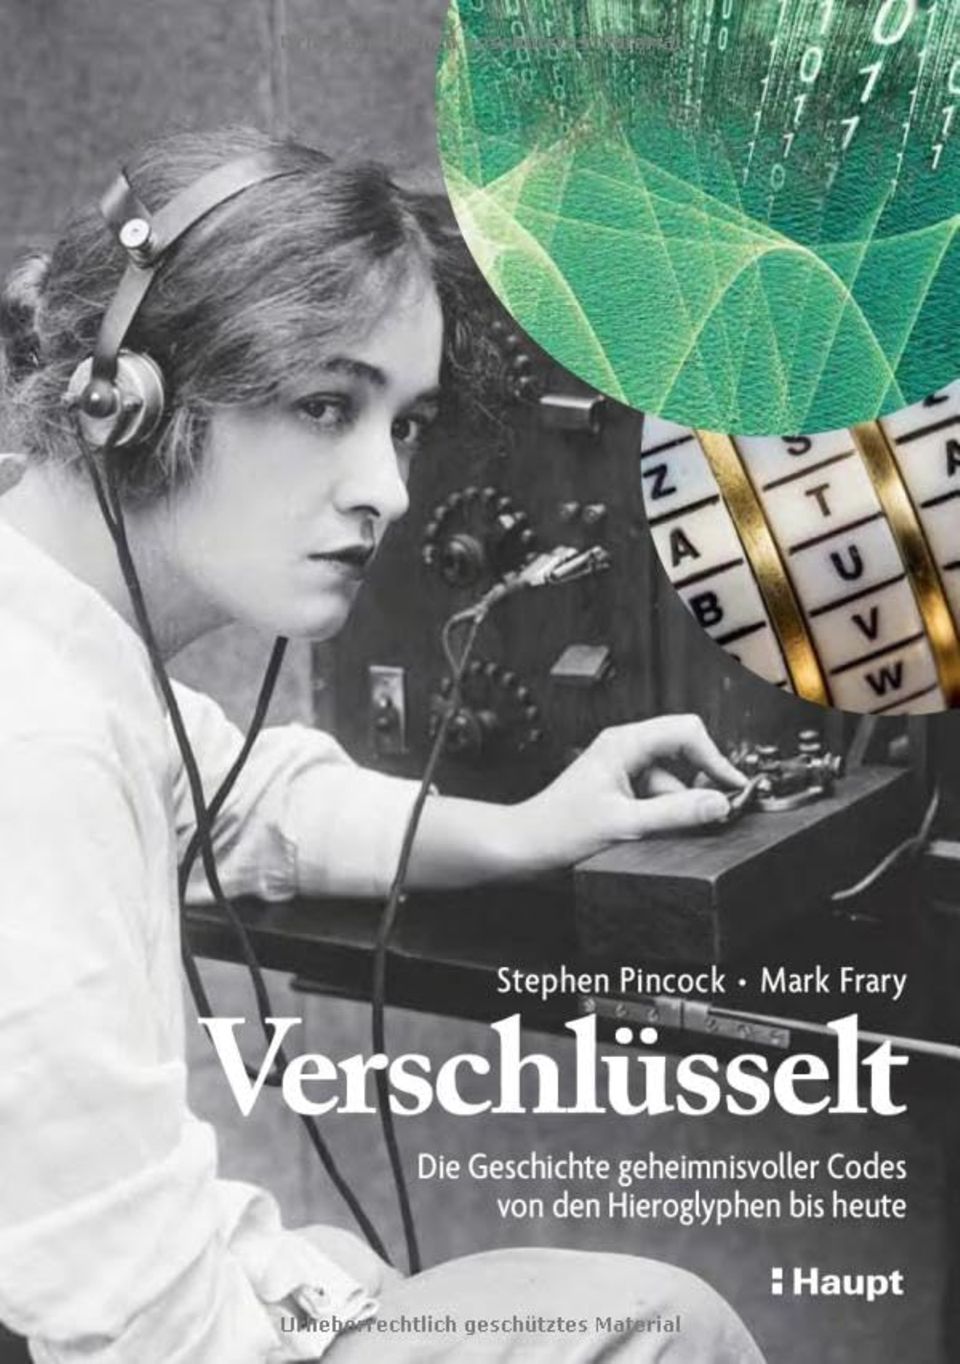 "Encrypted: The History of Mysterious Codes from the Hieroglyphs to Today" by Stephen Pincock and Mark Frary.  Haupt Verlag, hardcover, 192 pages, 36 euros.  Available at Amazon, Thalia and Bücher.de